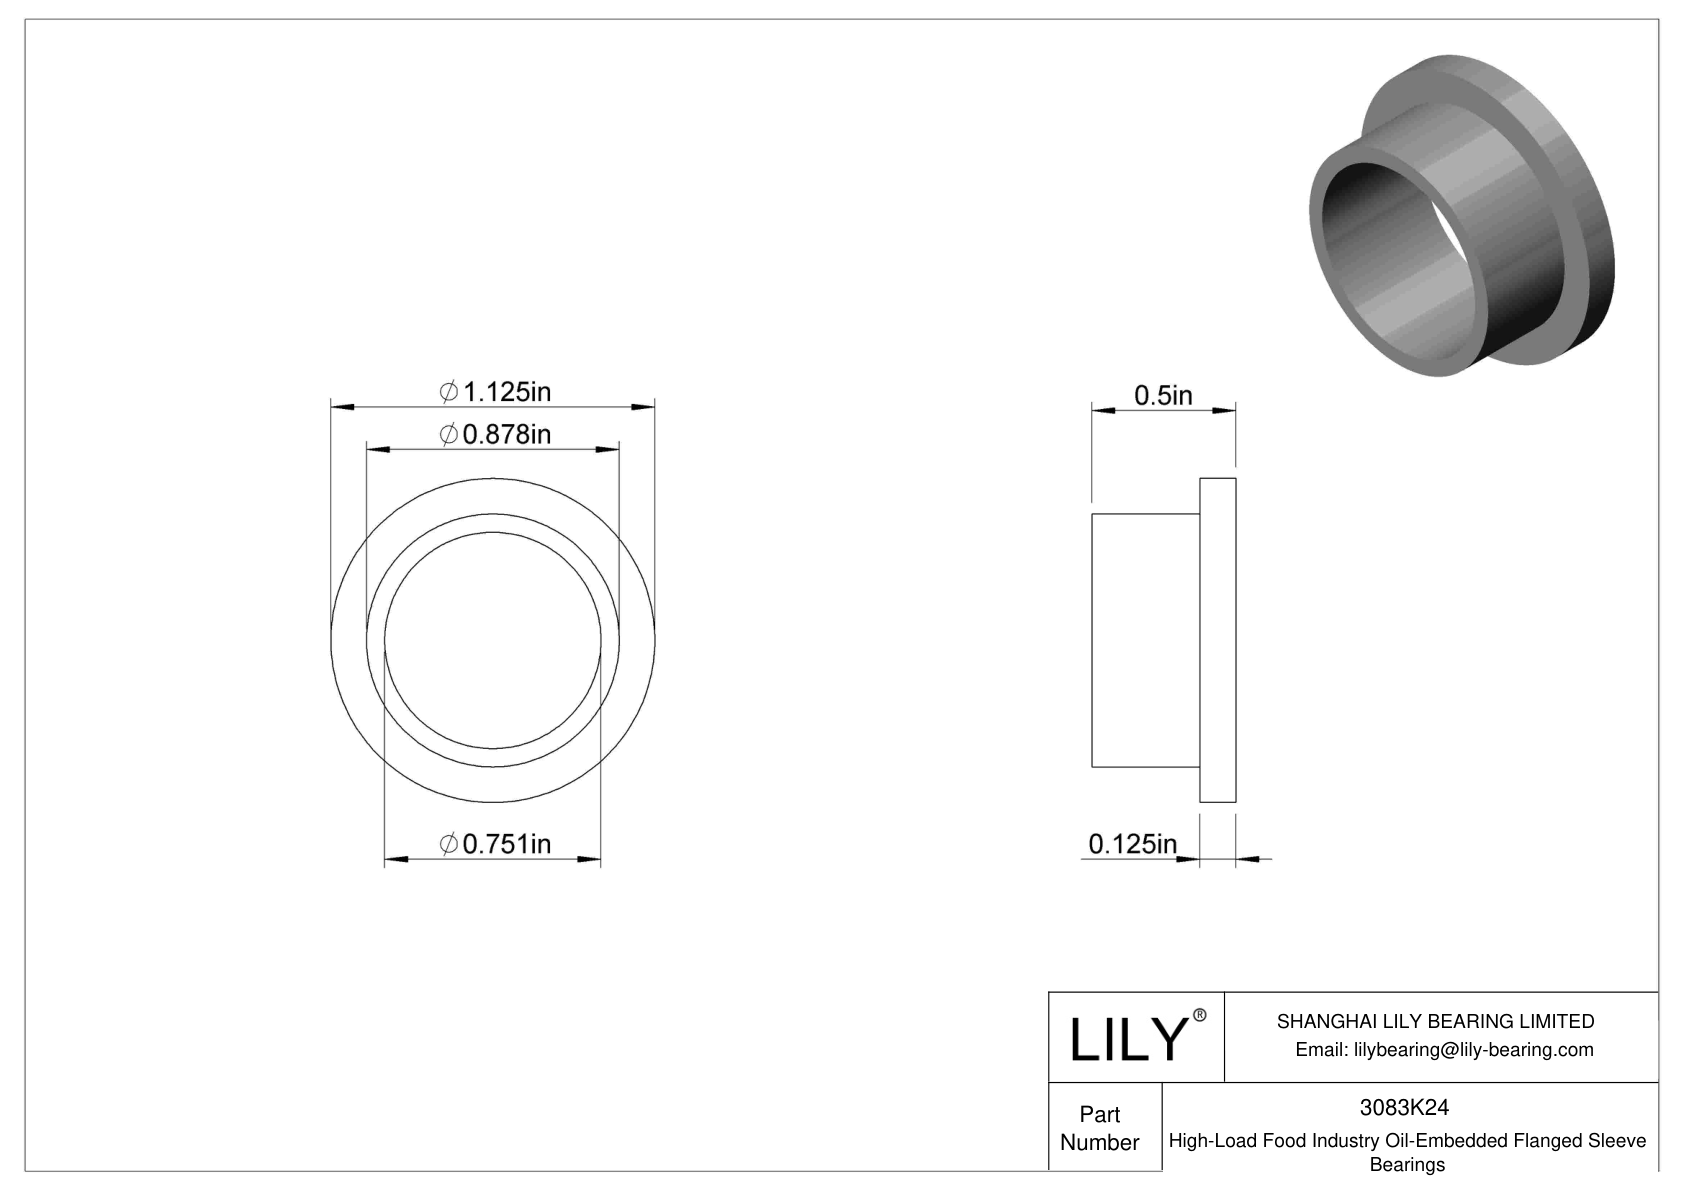 DAIDKCE High-Load Food Industry Oil-Embedded Flanged Sleeve Bearings cad drawing